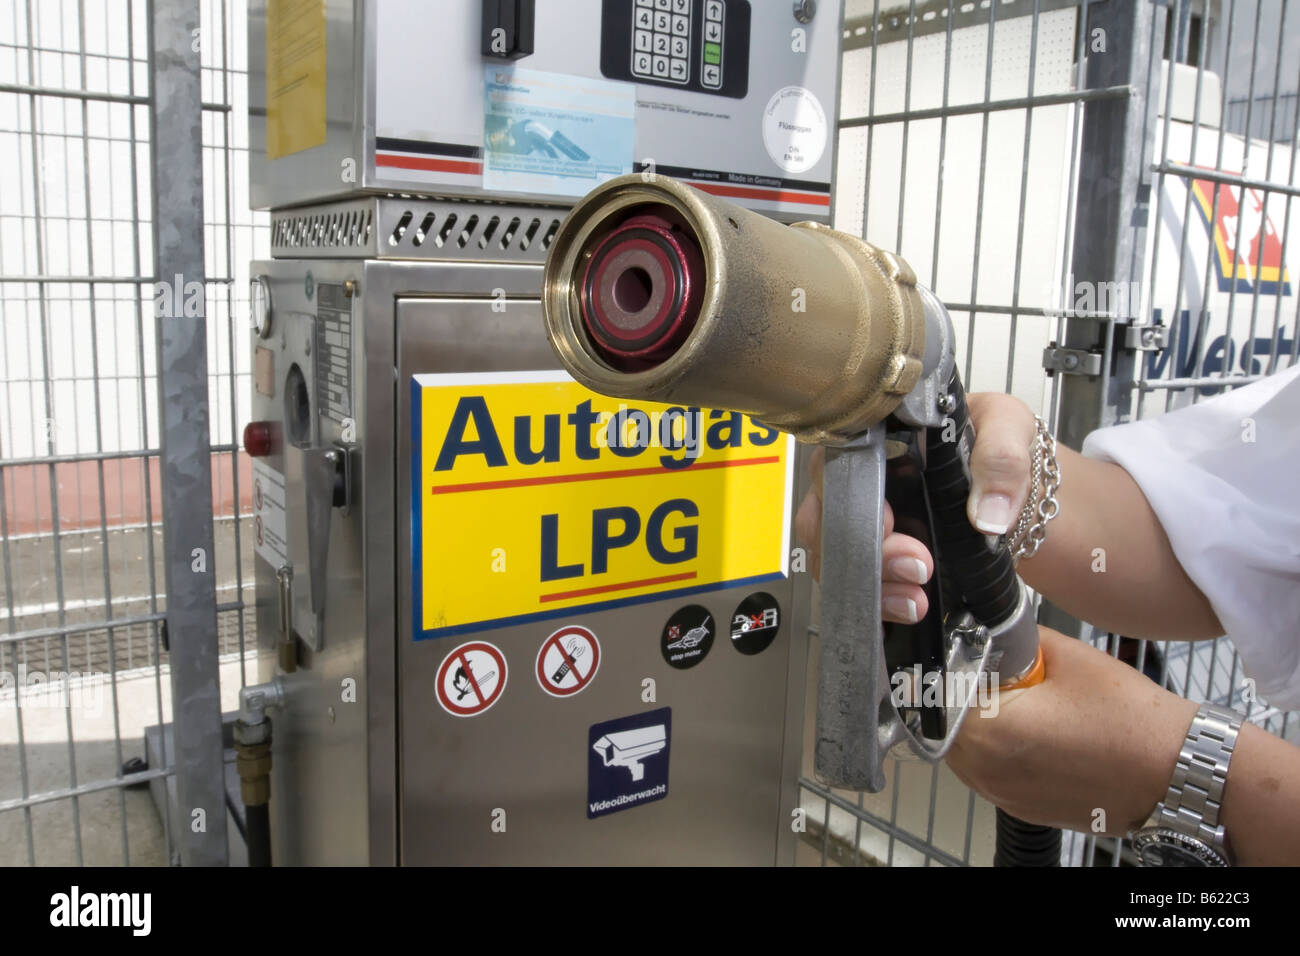 Gas pump, gas station for liquefied petroleum gas or LPG, Germany Stock Photo